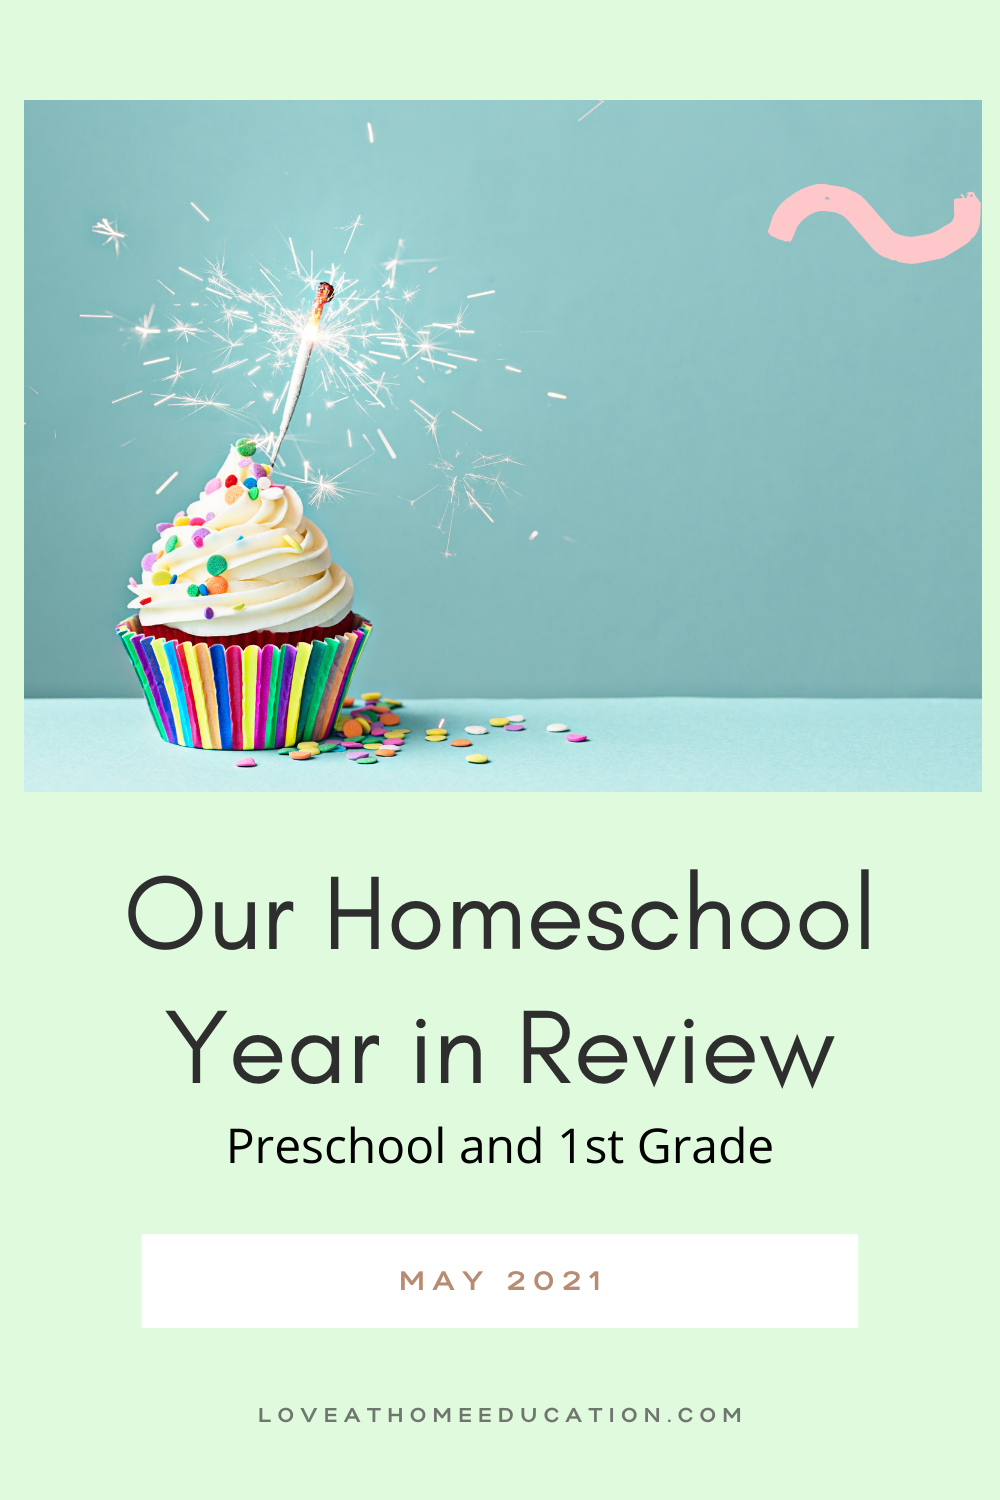 Our Year in Review: Preschool and 1st Grade